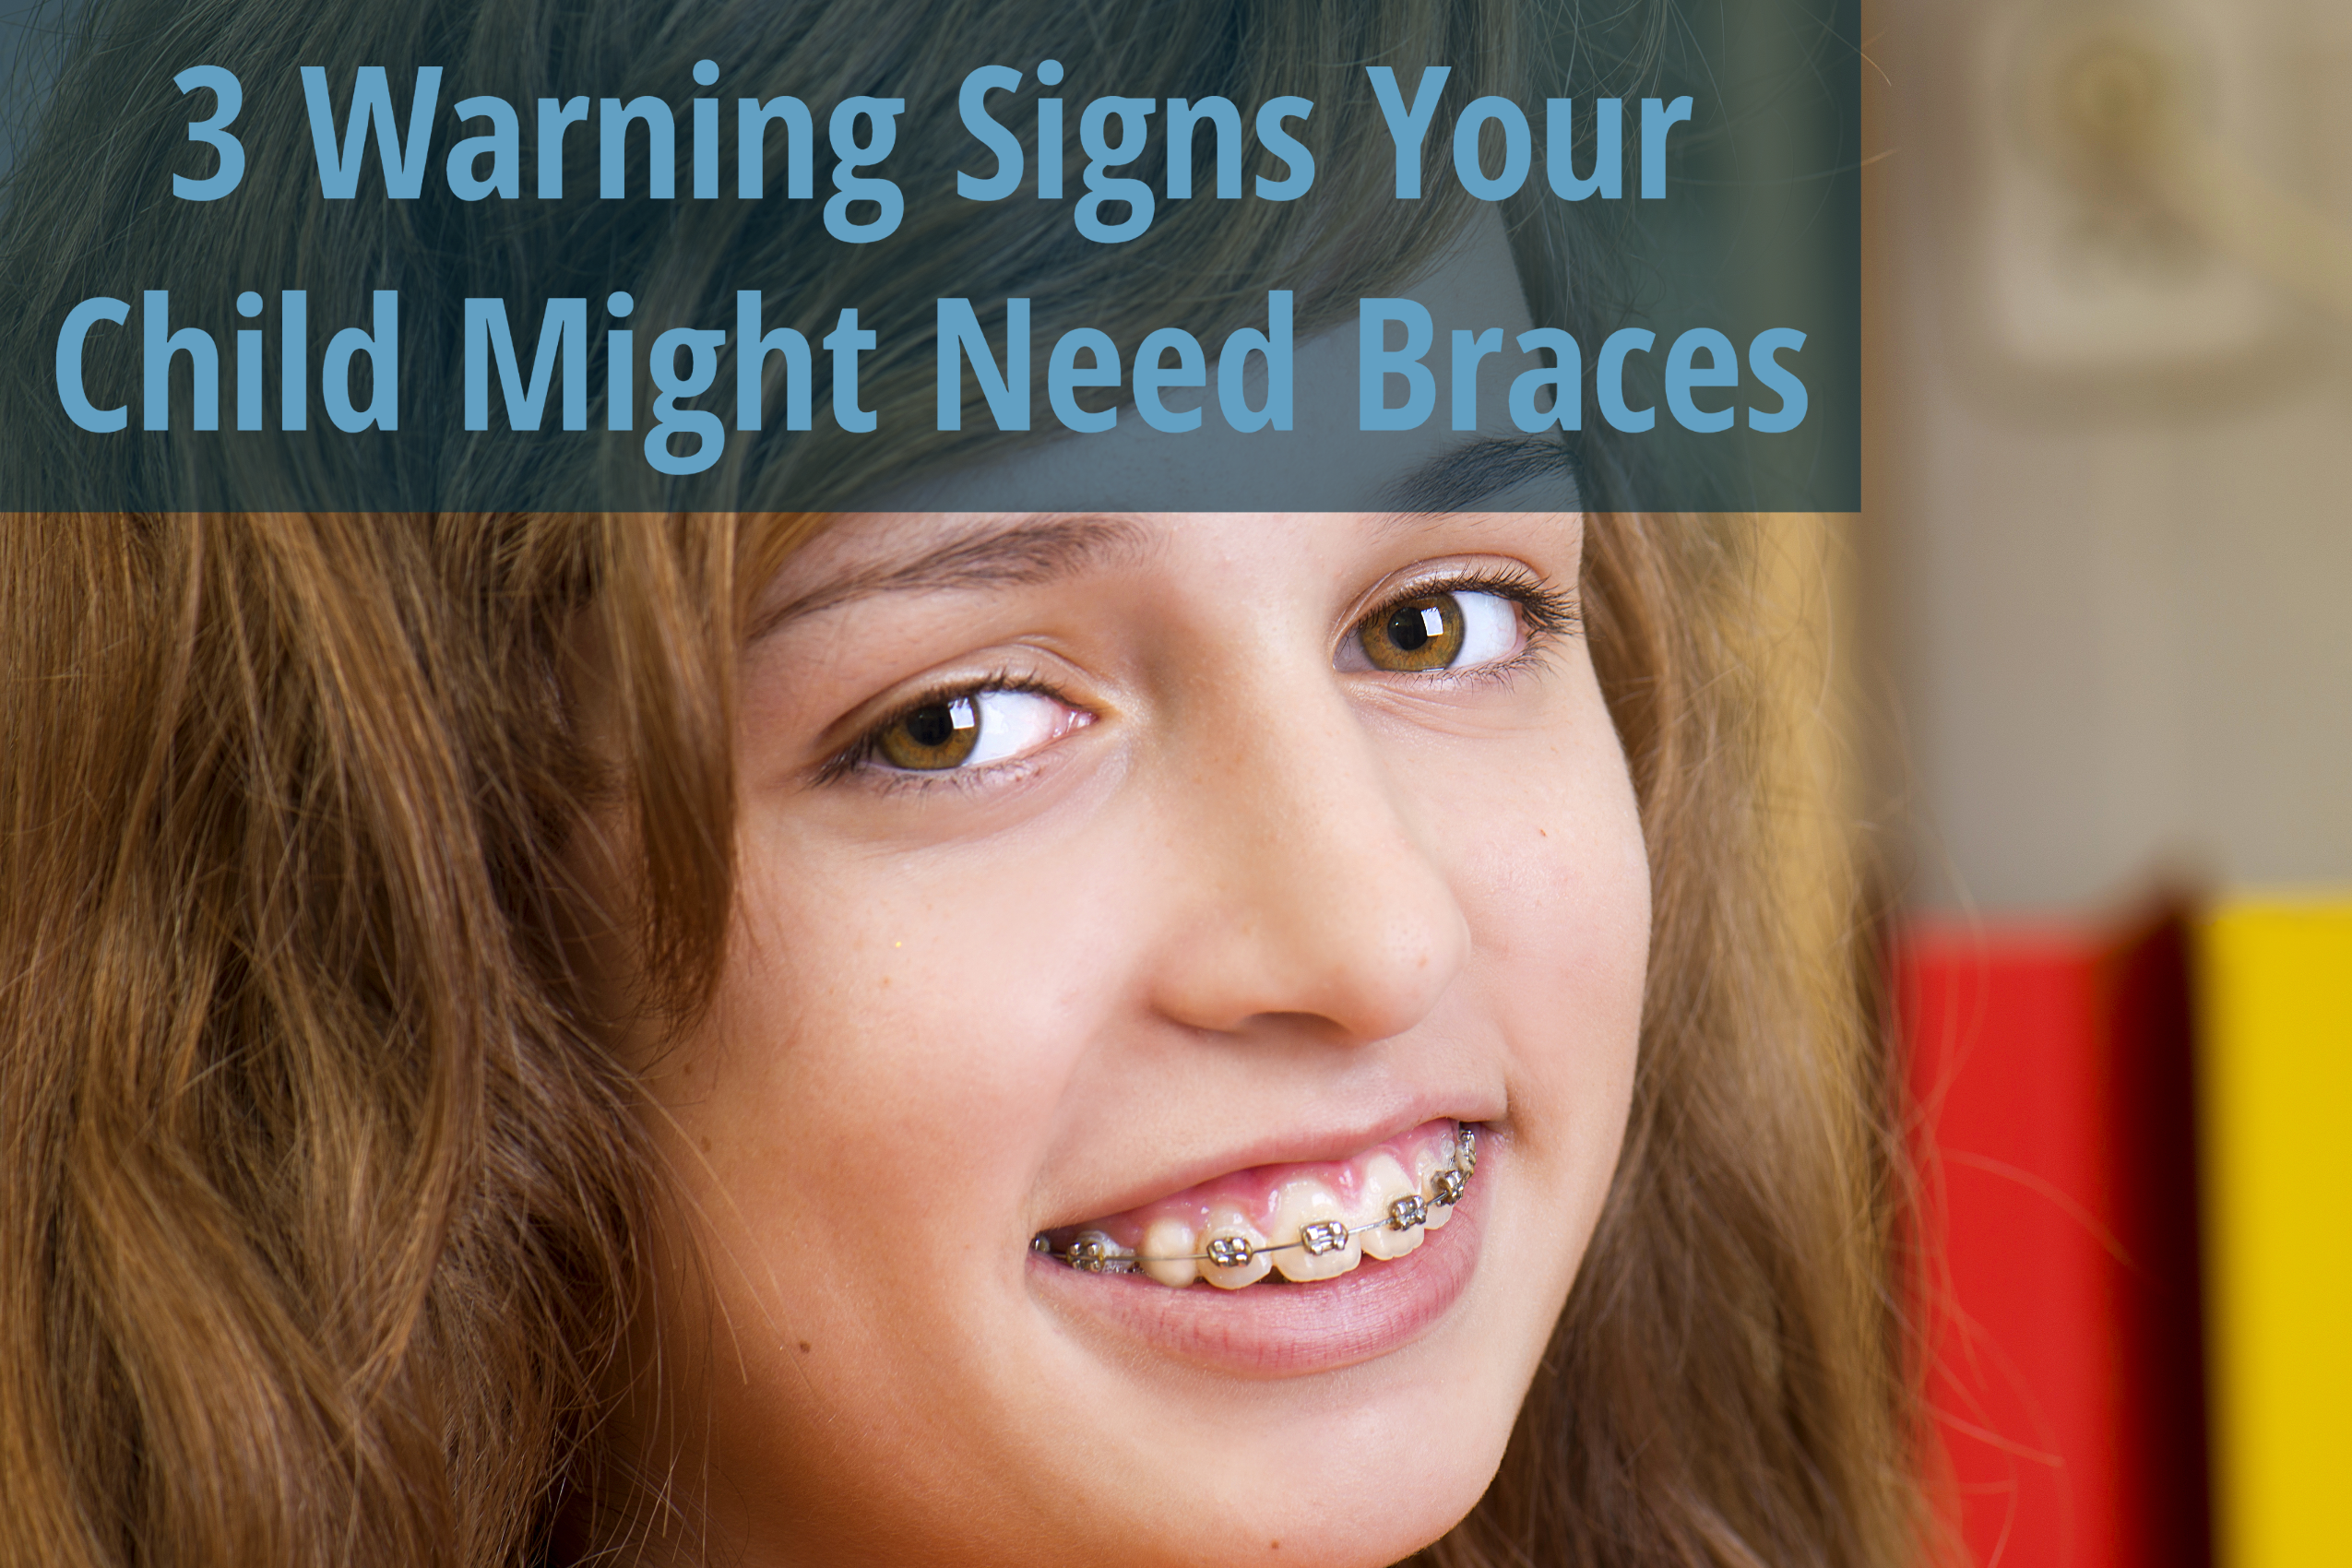 3 Warning Signs Your Child Might Need Braces